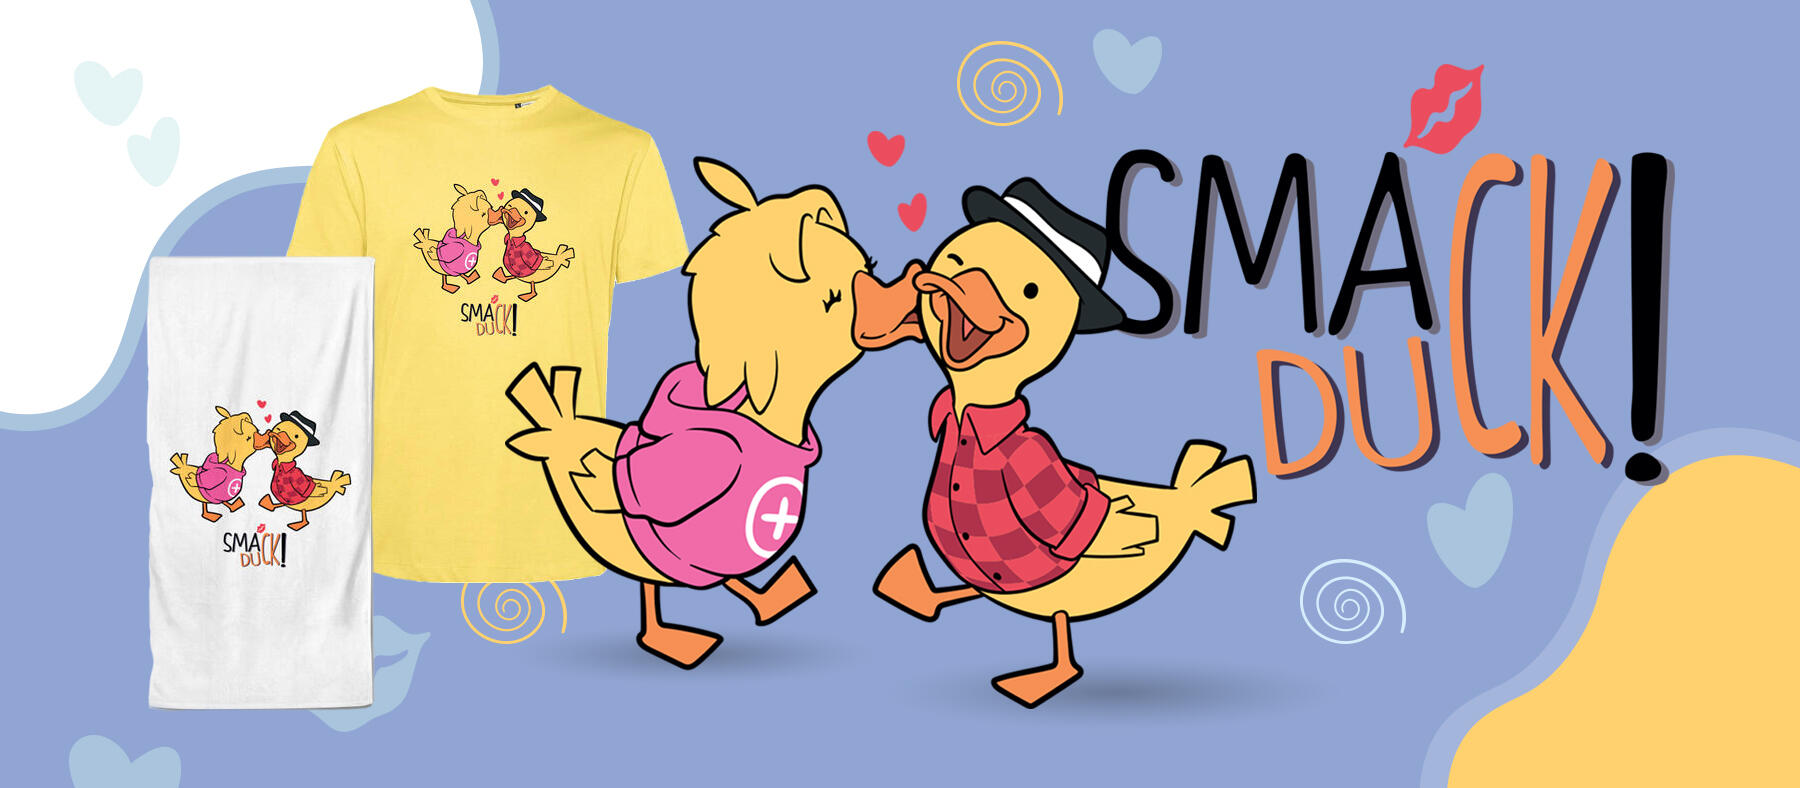 799991 1800 0751 smack duck banner homepage